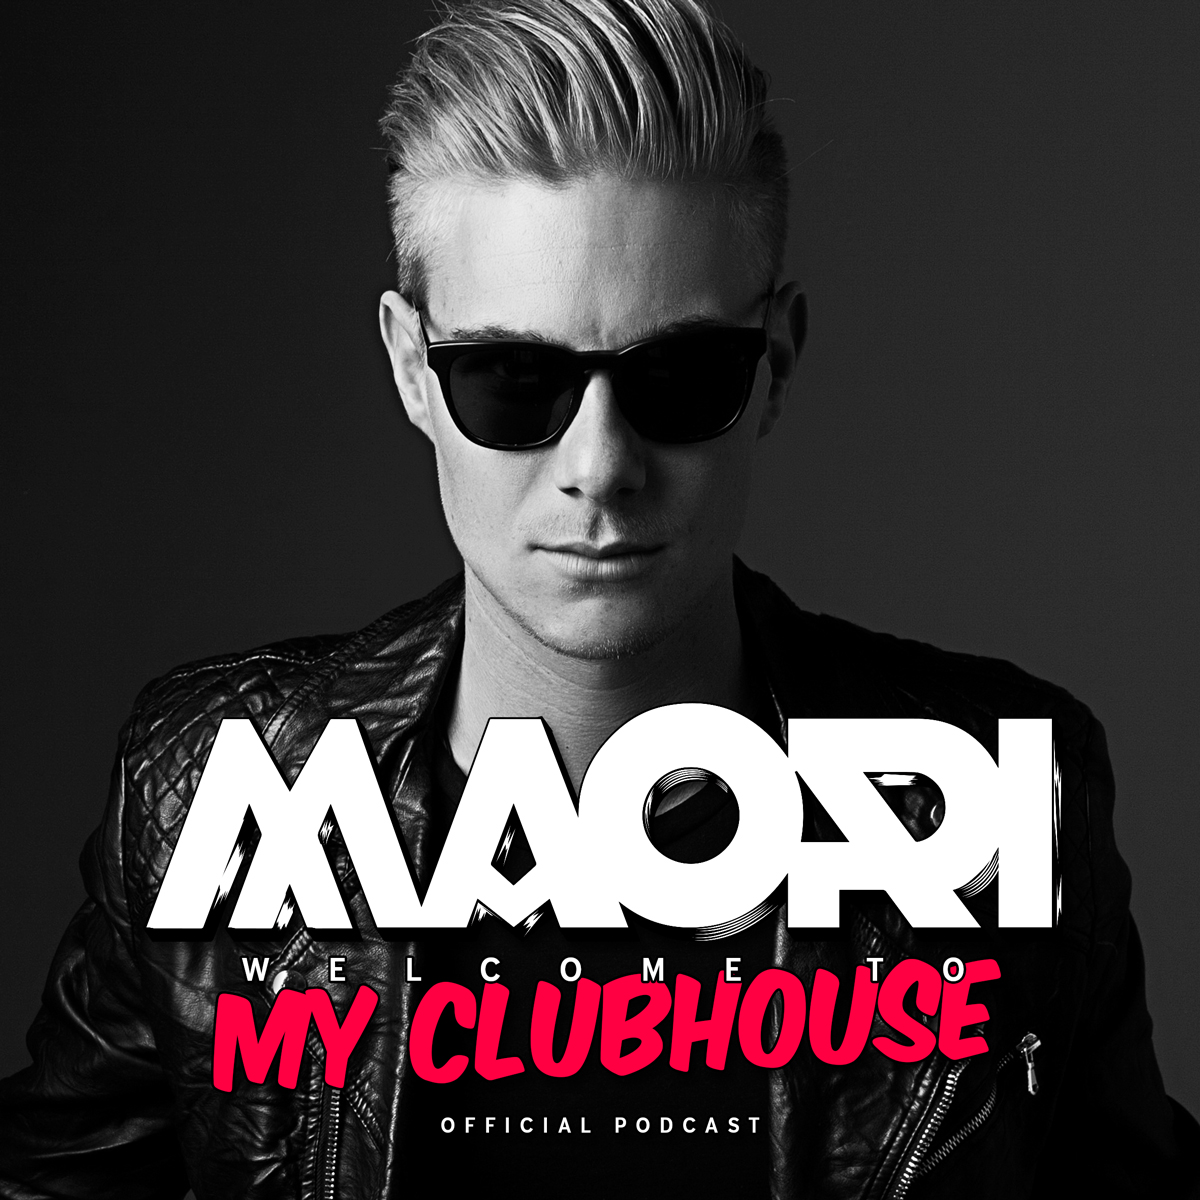 My Clubhouse by Maori - Podcast #035